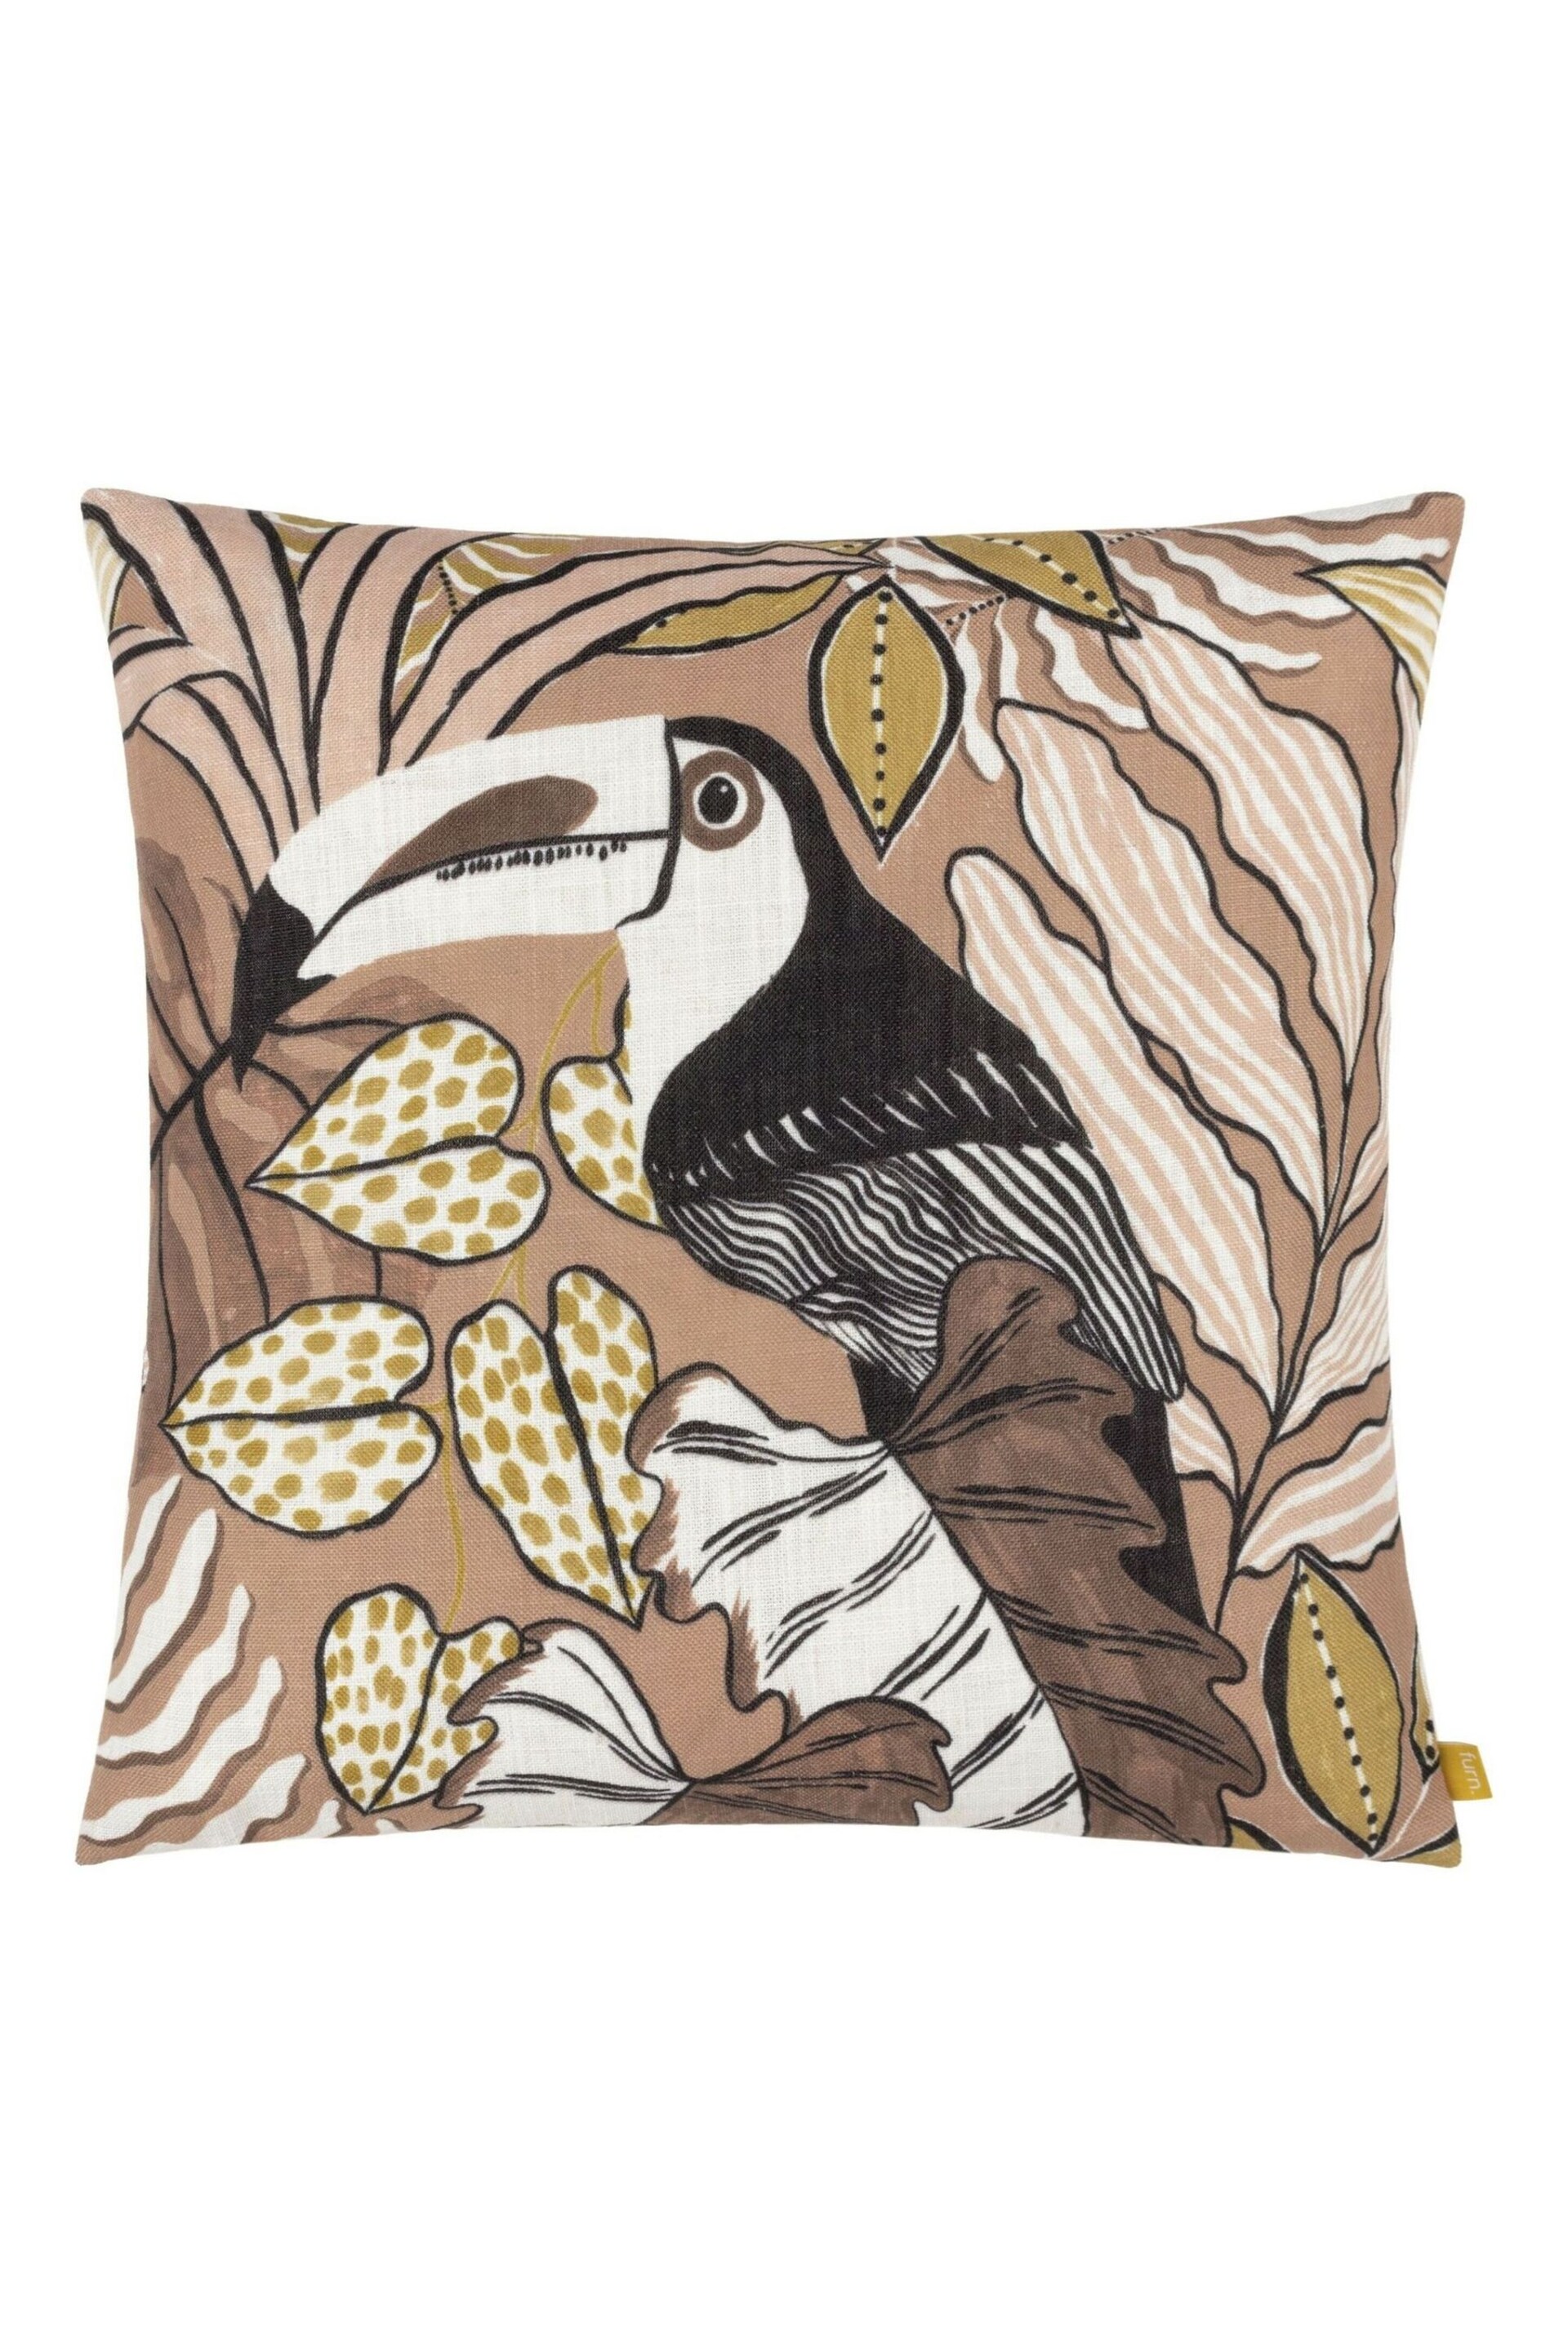 Furn Natural Tocorico Tropical Polyester Filled Cushion - Image 2 of 4